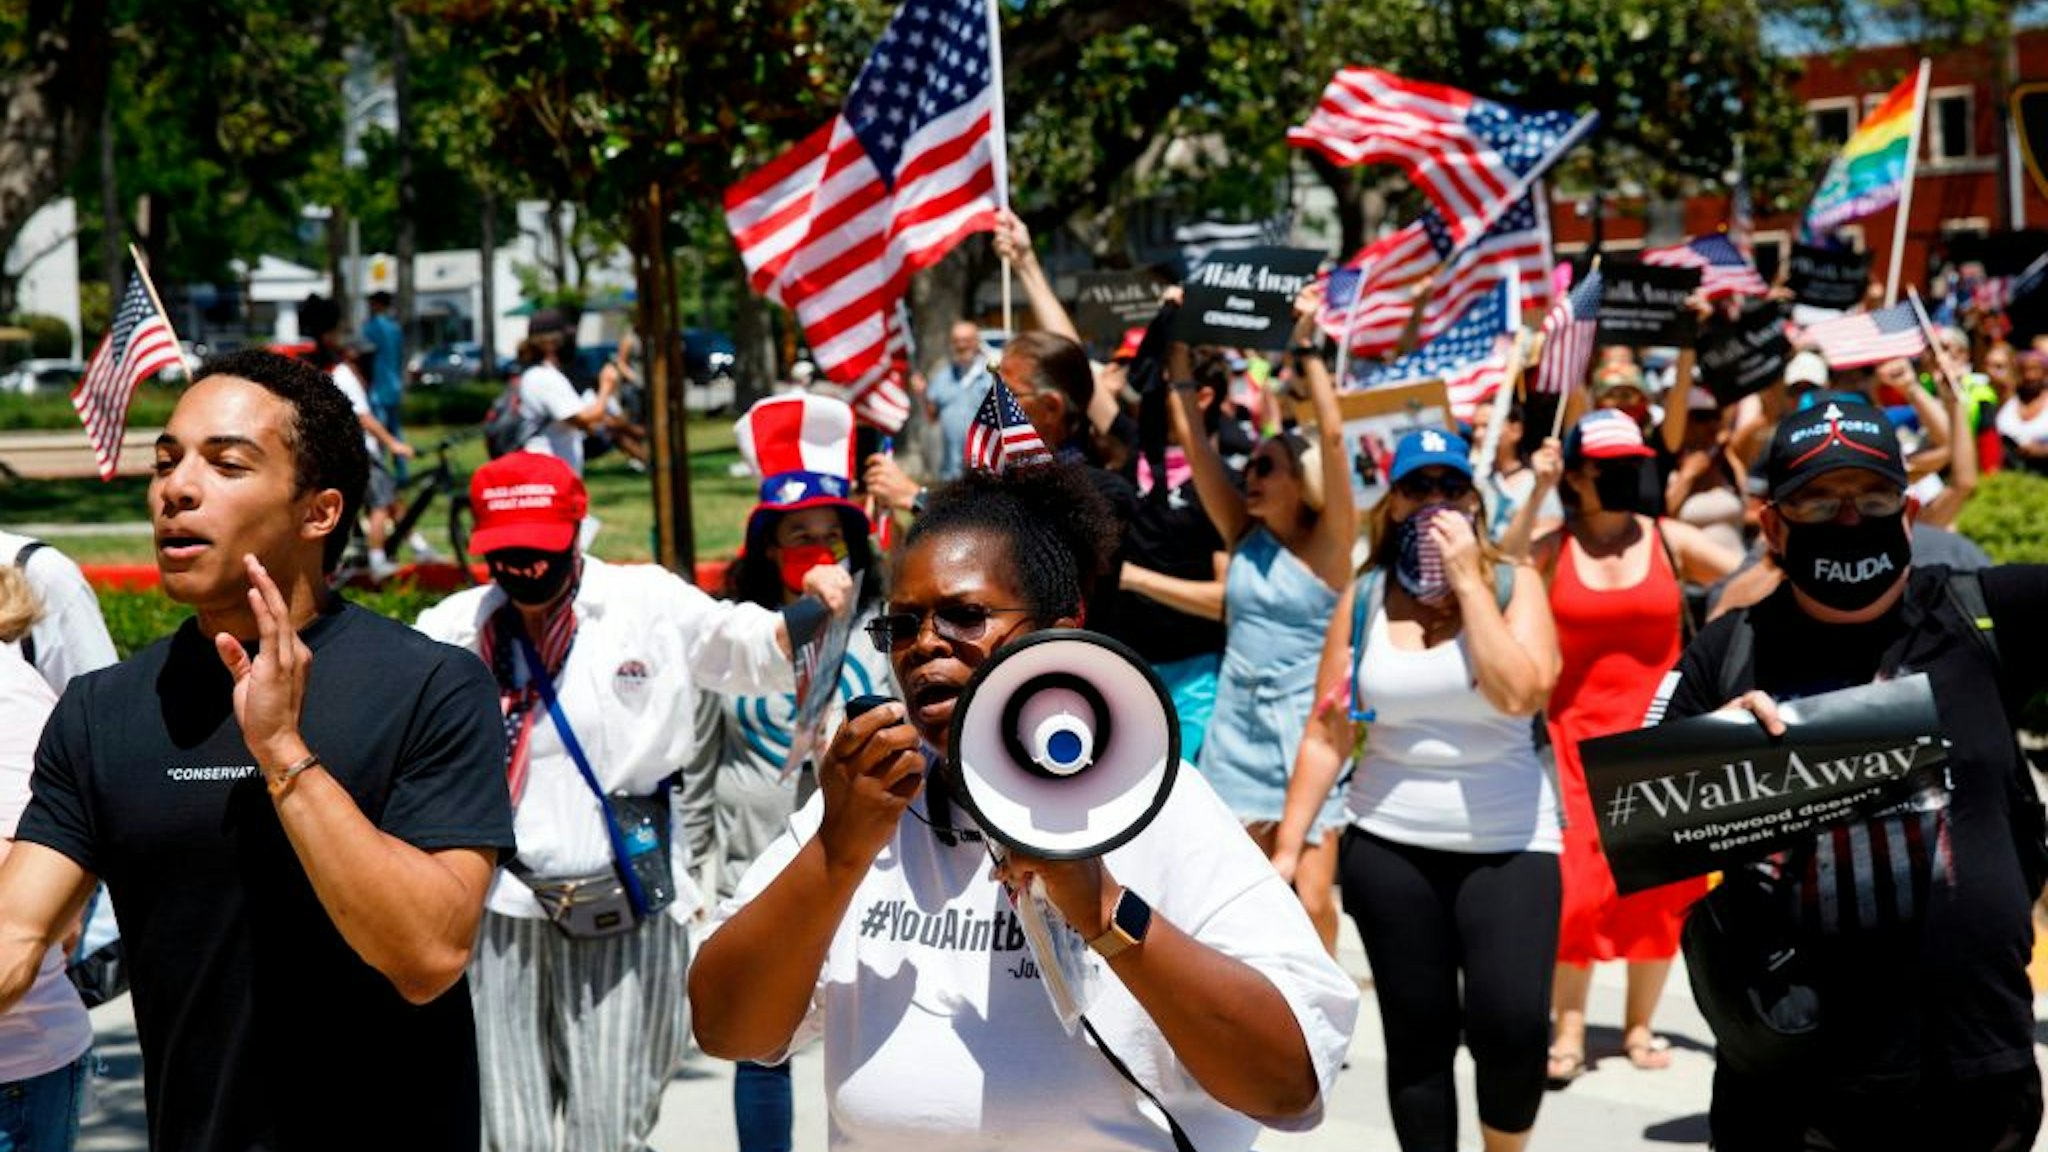 Demonstrators wave flags as they march in support of the US president during a WalkAway rally on August 8, 2020 in Beverly Hills, California.